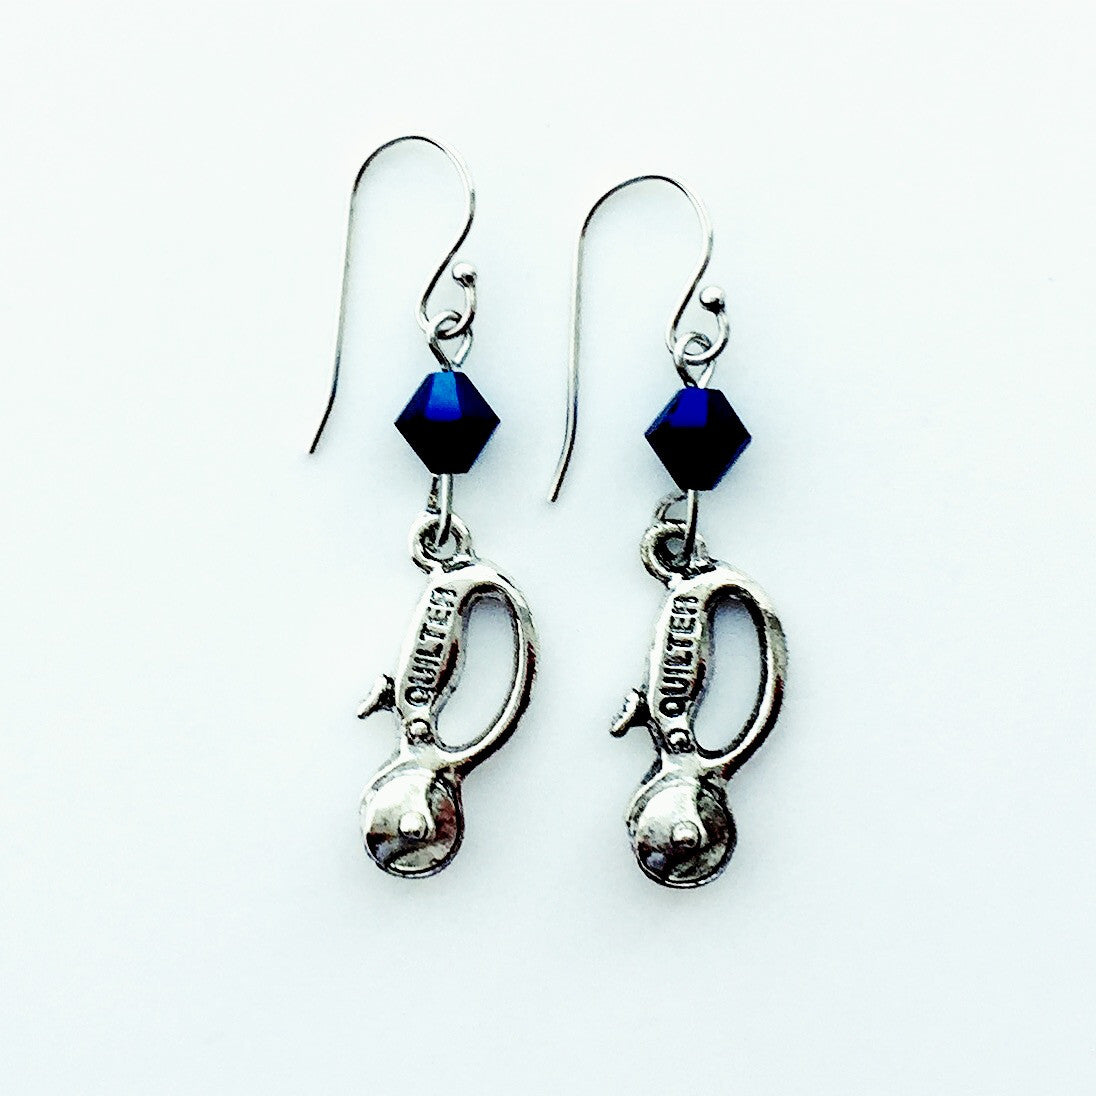 ____ Quilt Cutter Silver Earrings with Blue Swarovski Crystals.